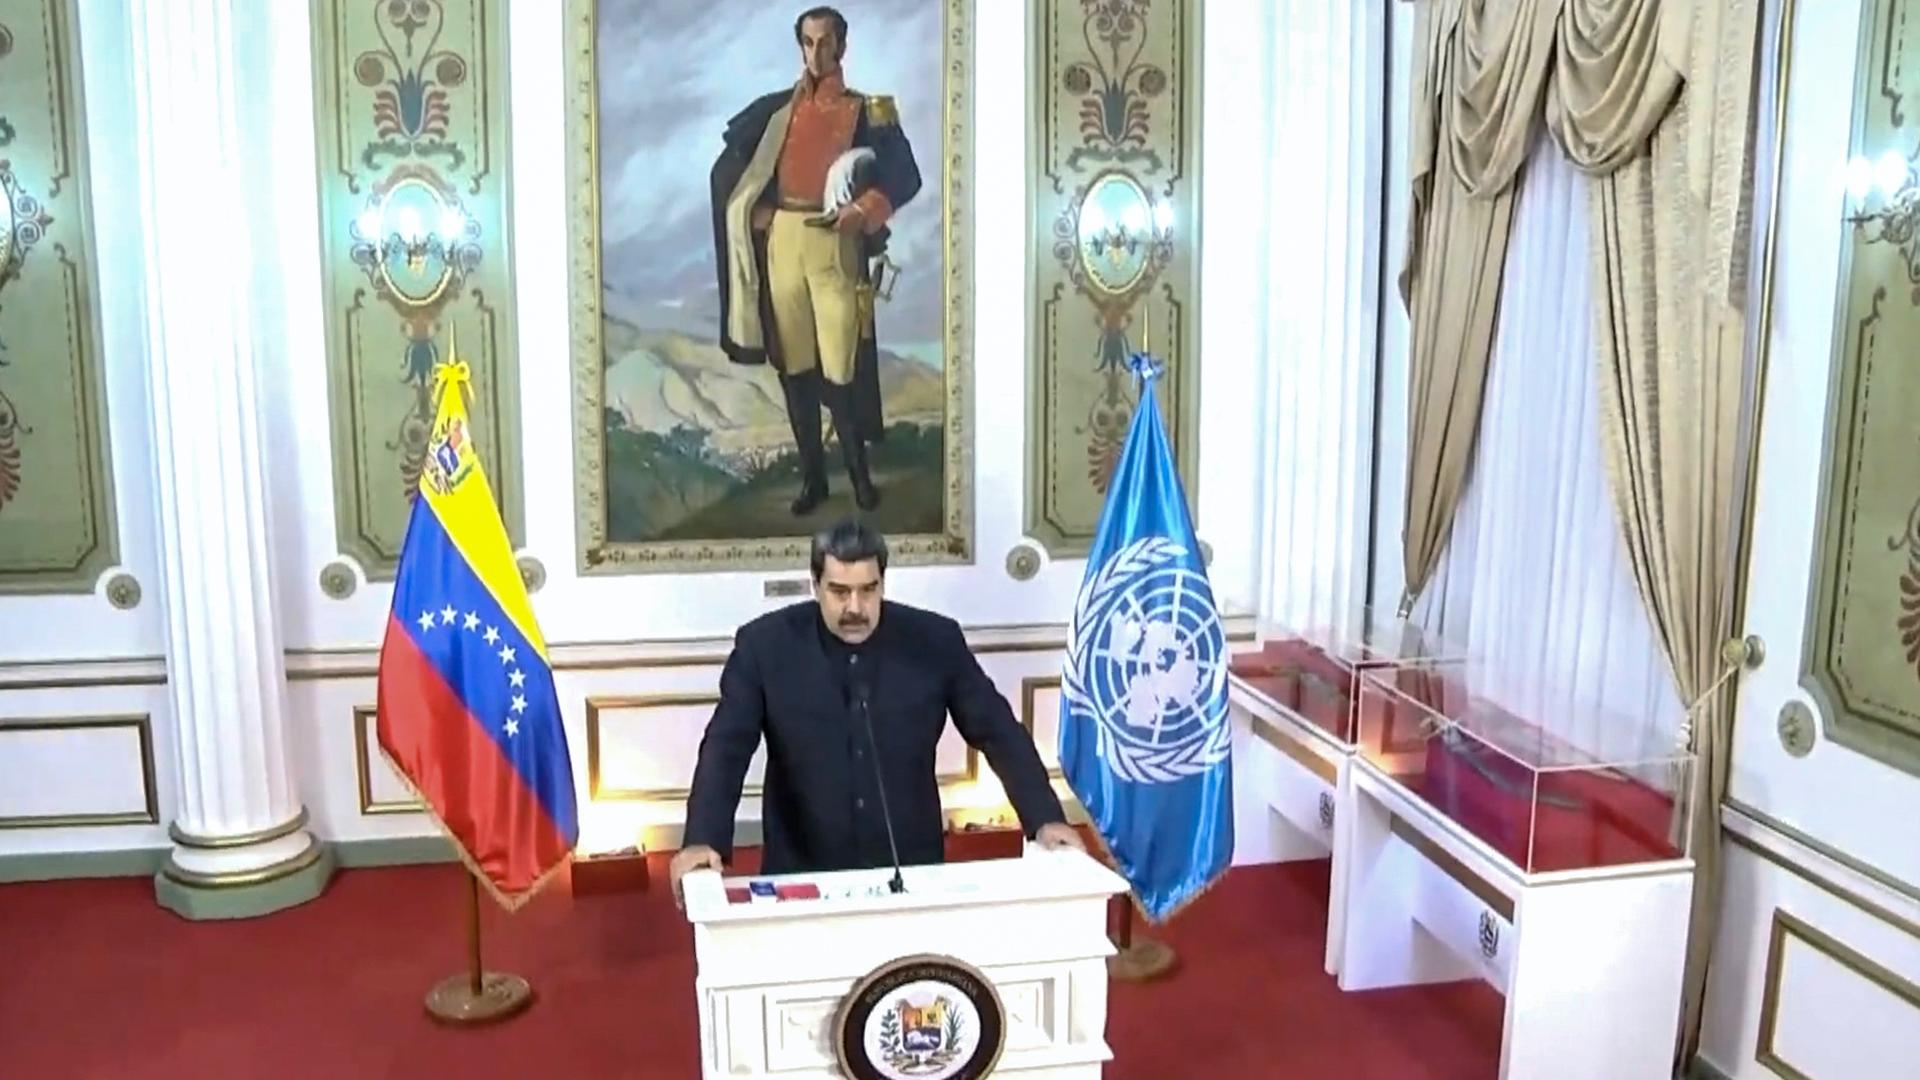 Maduro speaks at a white podium flanked by two flags in a decorative room with a painting of a uniformed man behind him. 